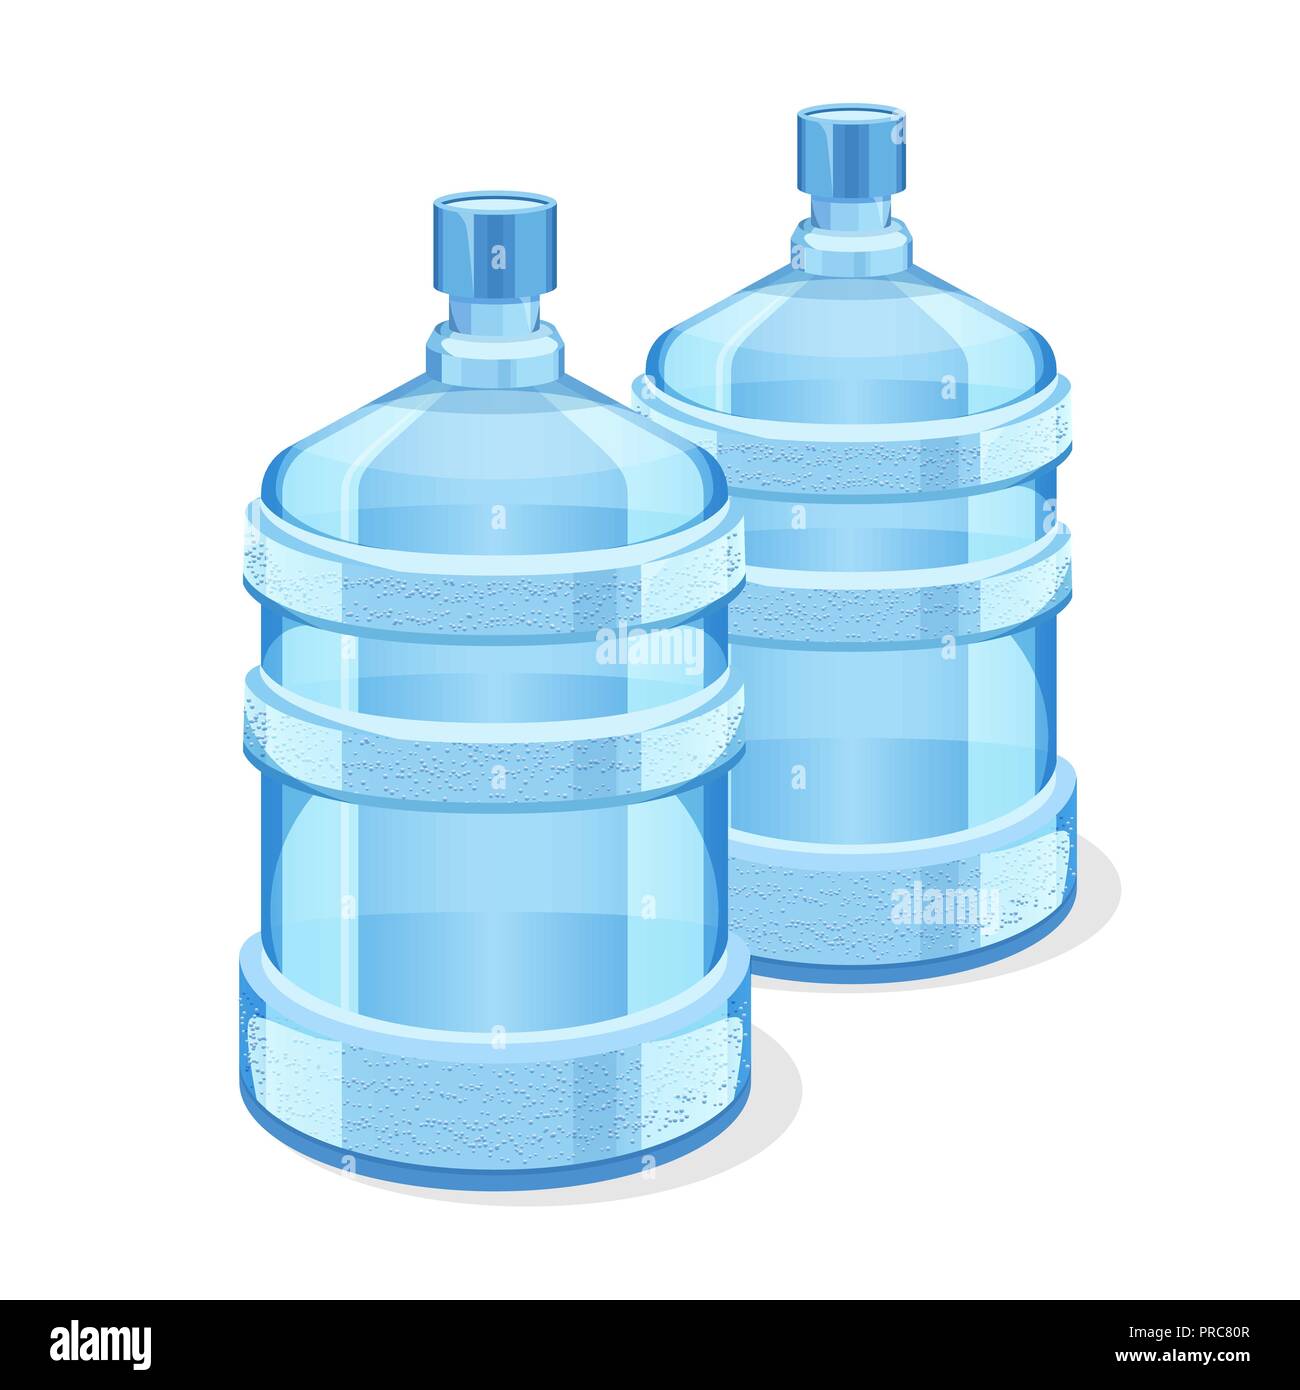 Closeup Shallow Focus View Of An Open Office Showing Detail Of The Large  Water Dispenser Bottle And Plastic Handle With The Bottle Full Of Water  Stock Photo - Download Image Now - iStock